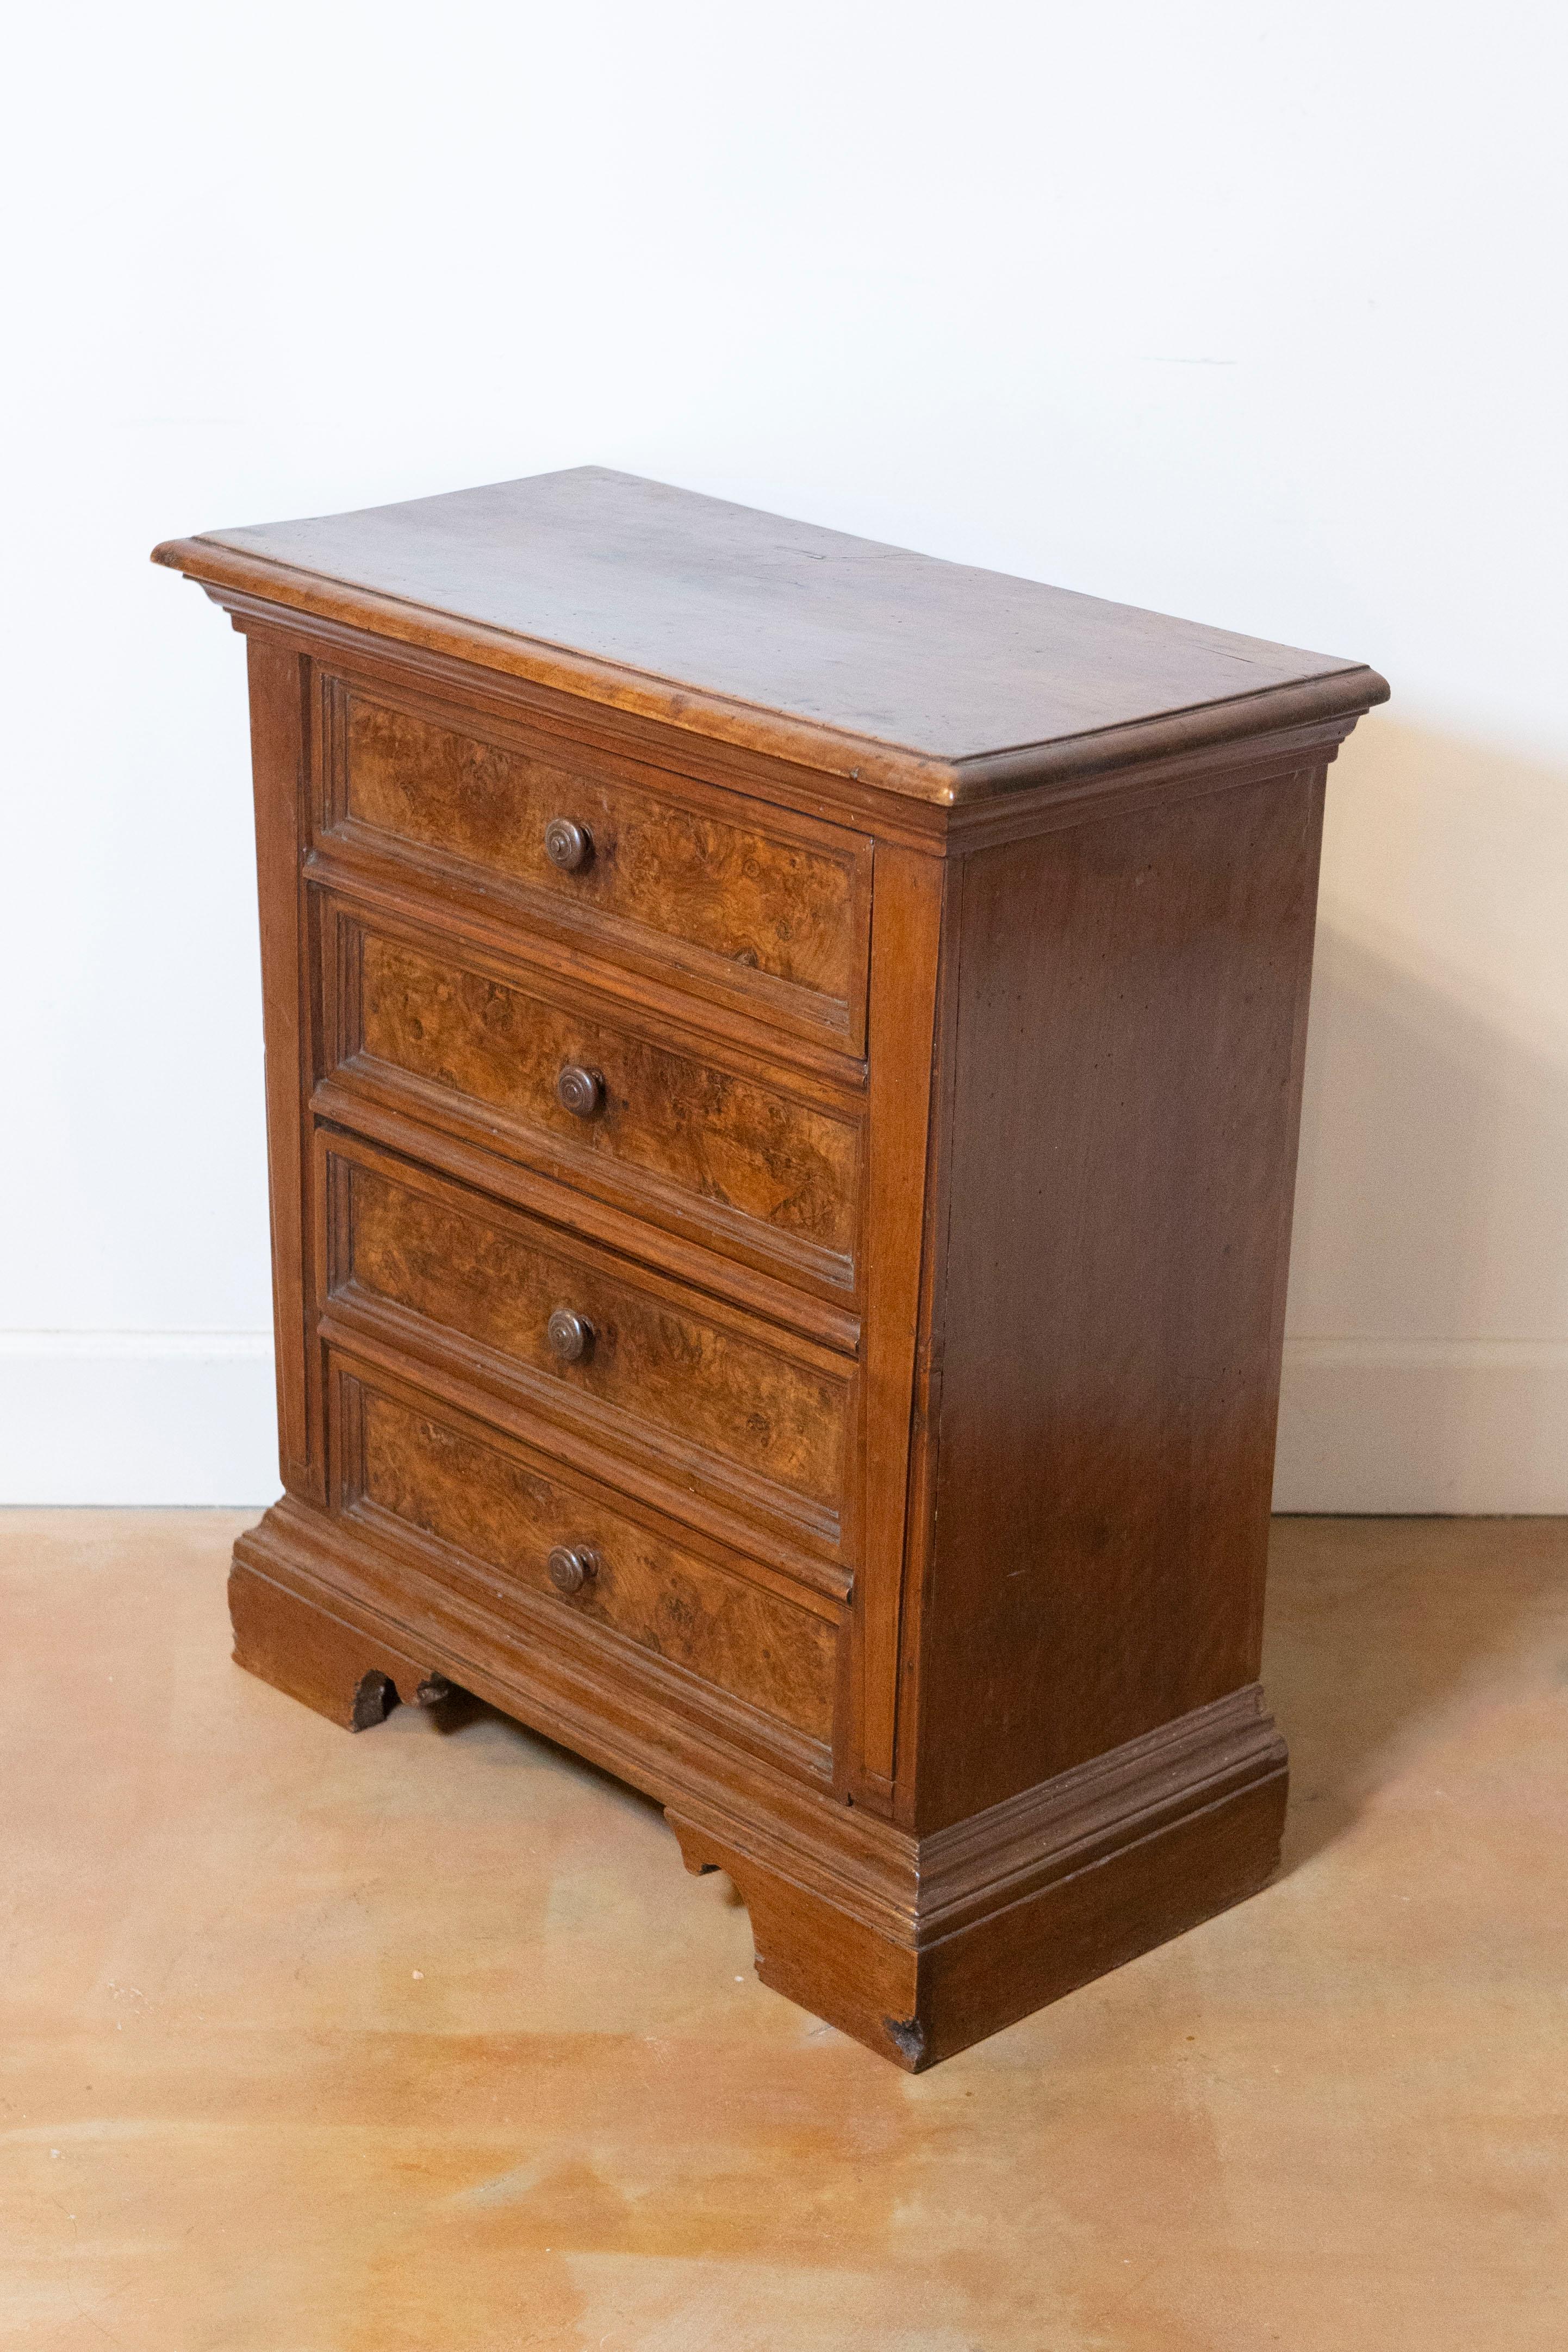 Italian 1840s Bedside Chest with Four Drawers, Burl Panels and Bracket Feet In Good Condition For Sale In Atlanta, GA